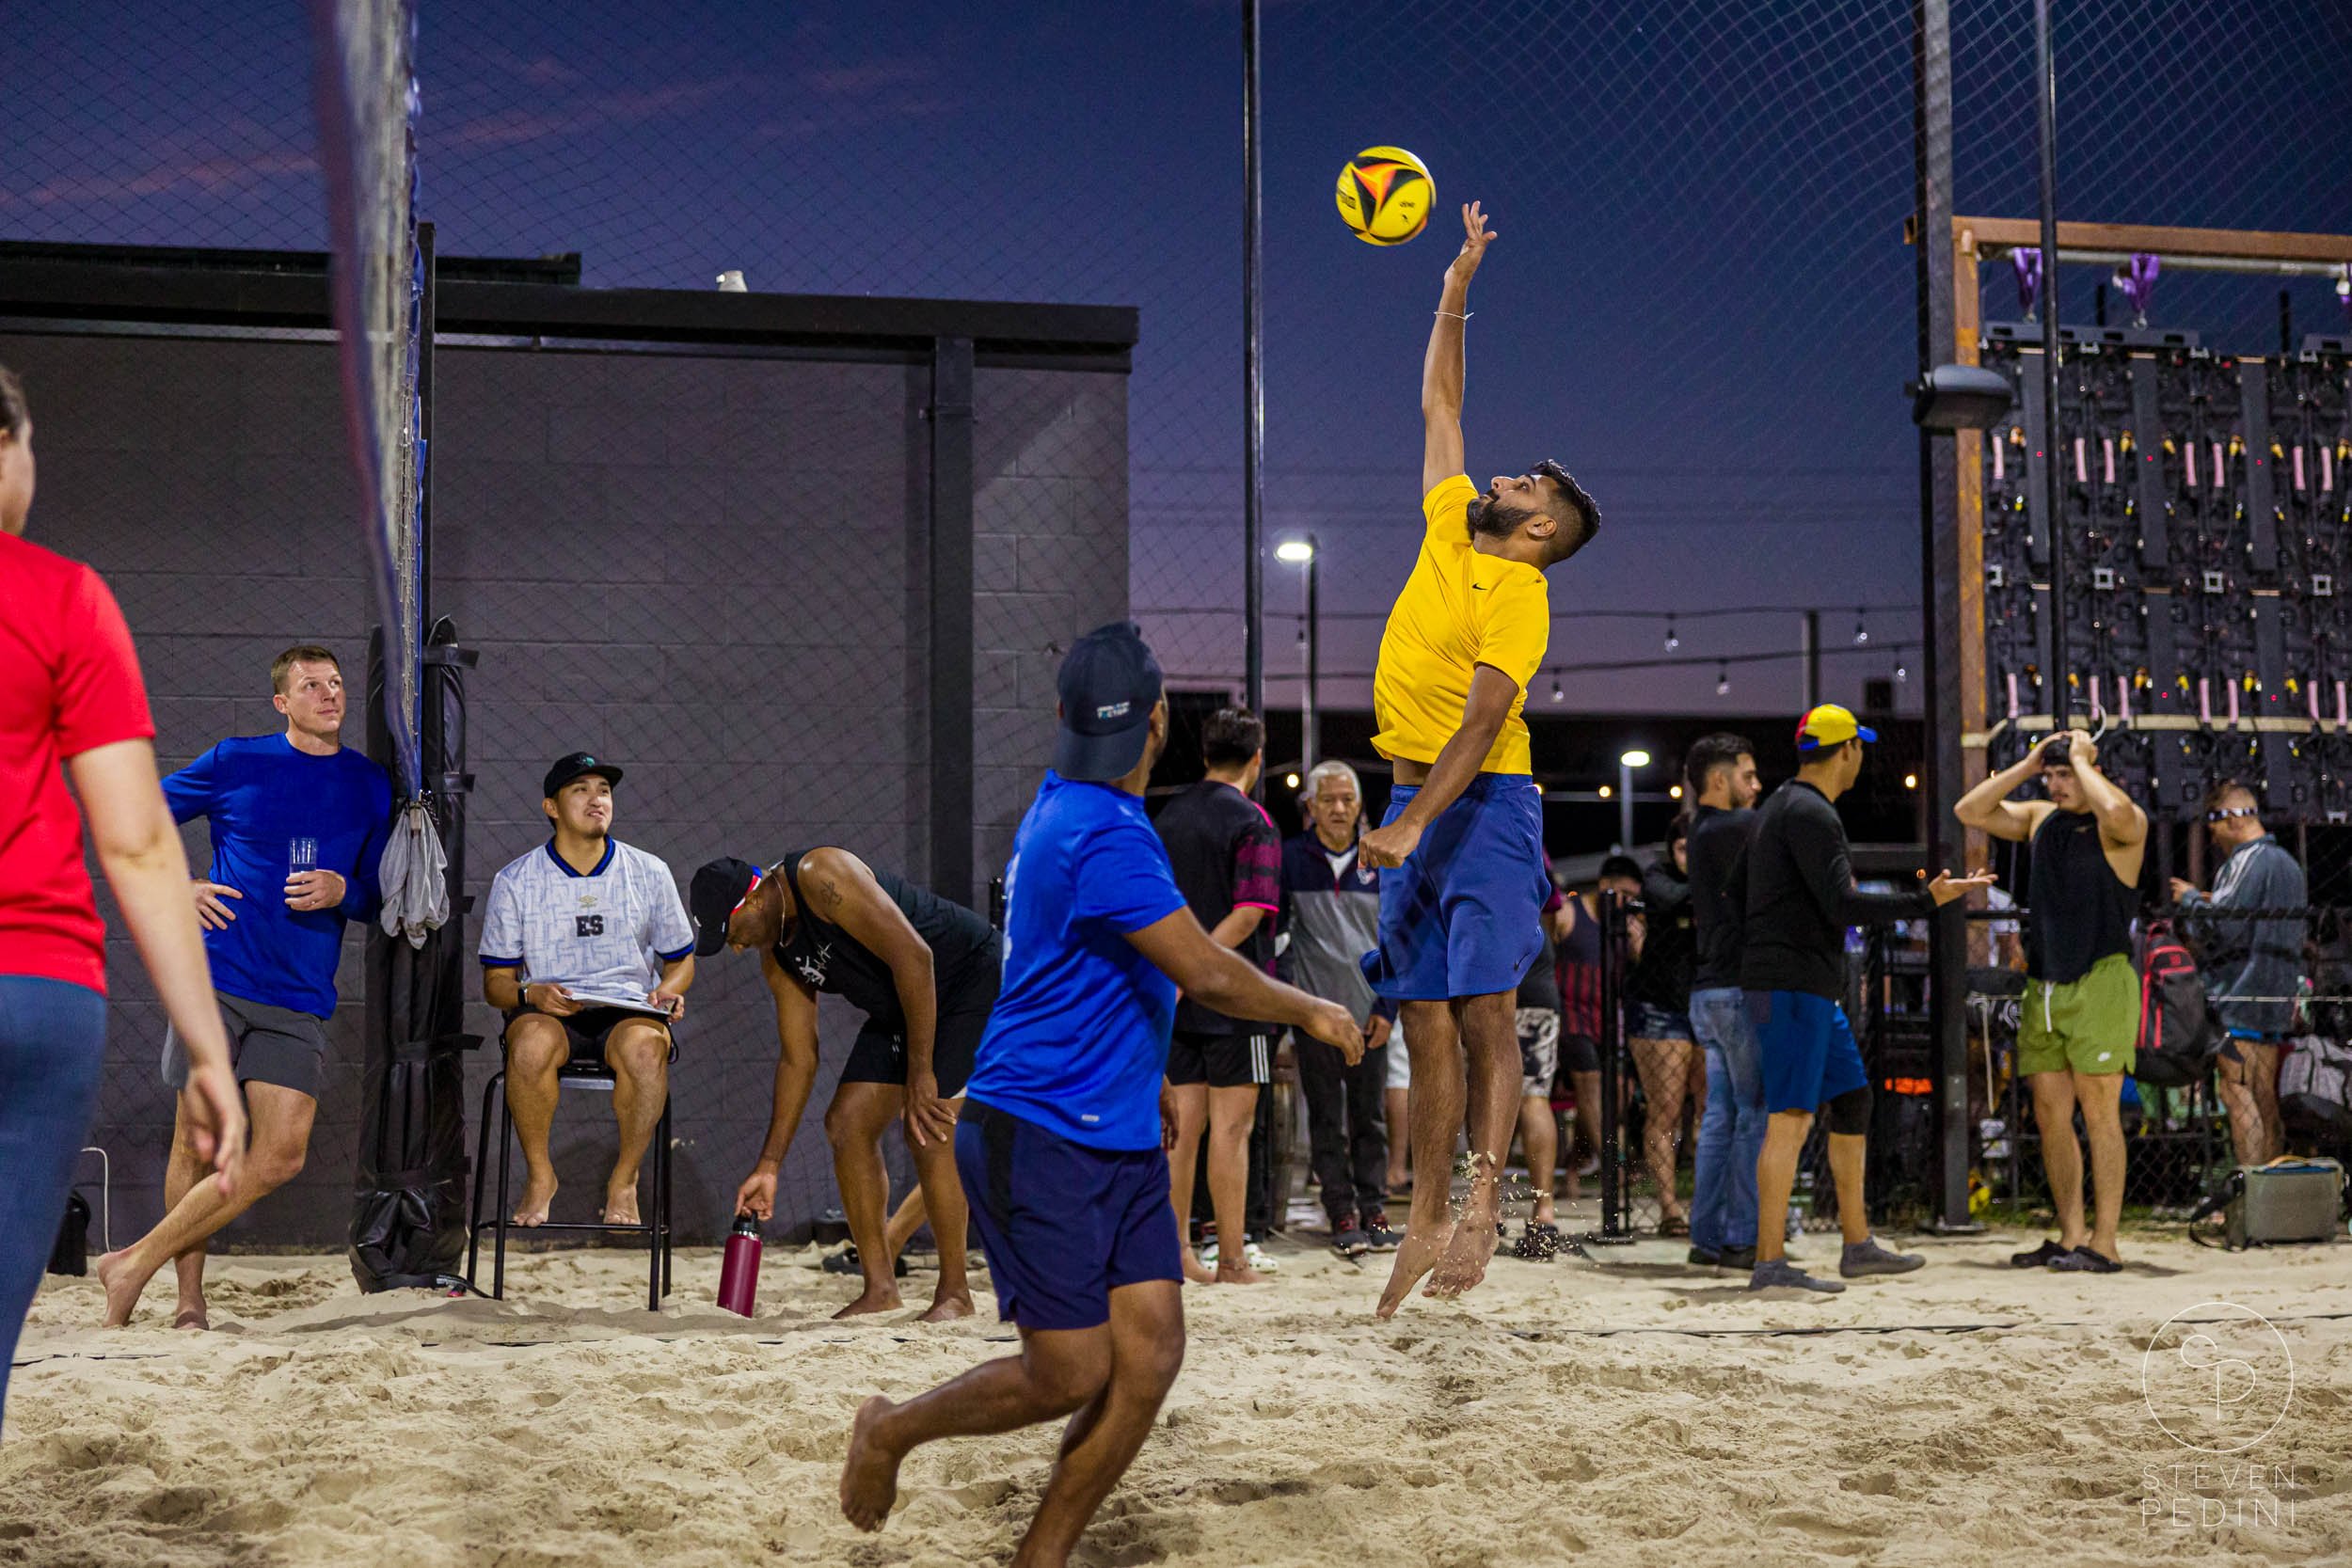 Steven Pedini Photography - Bumpy Pickle - Sand Volleyball - Houston TX - World Cup of Volleyball - 00329.jpg